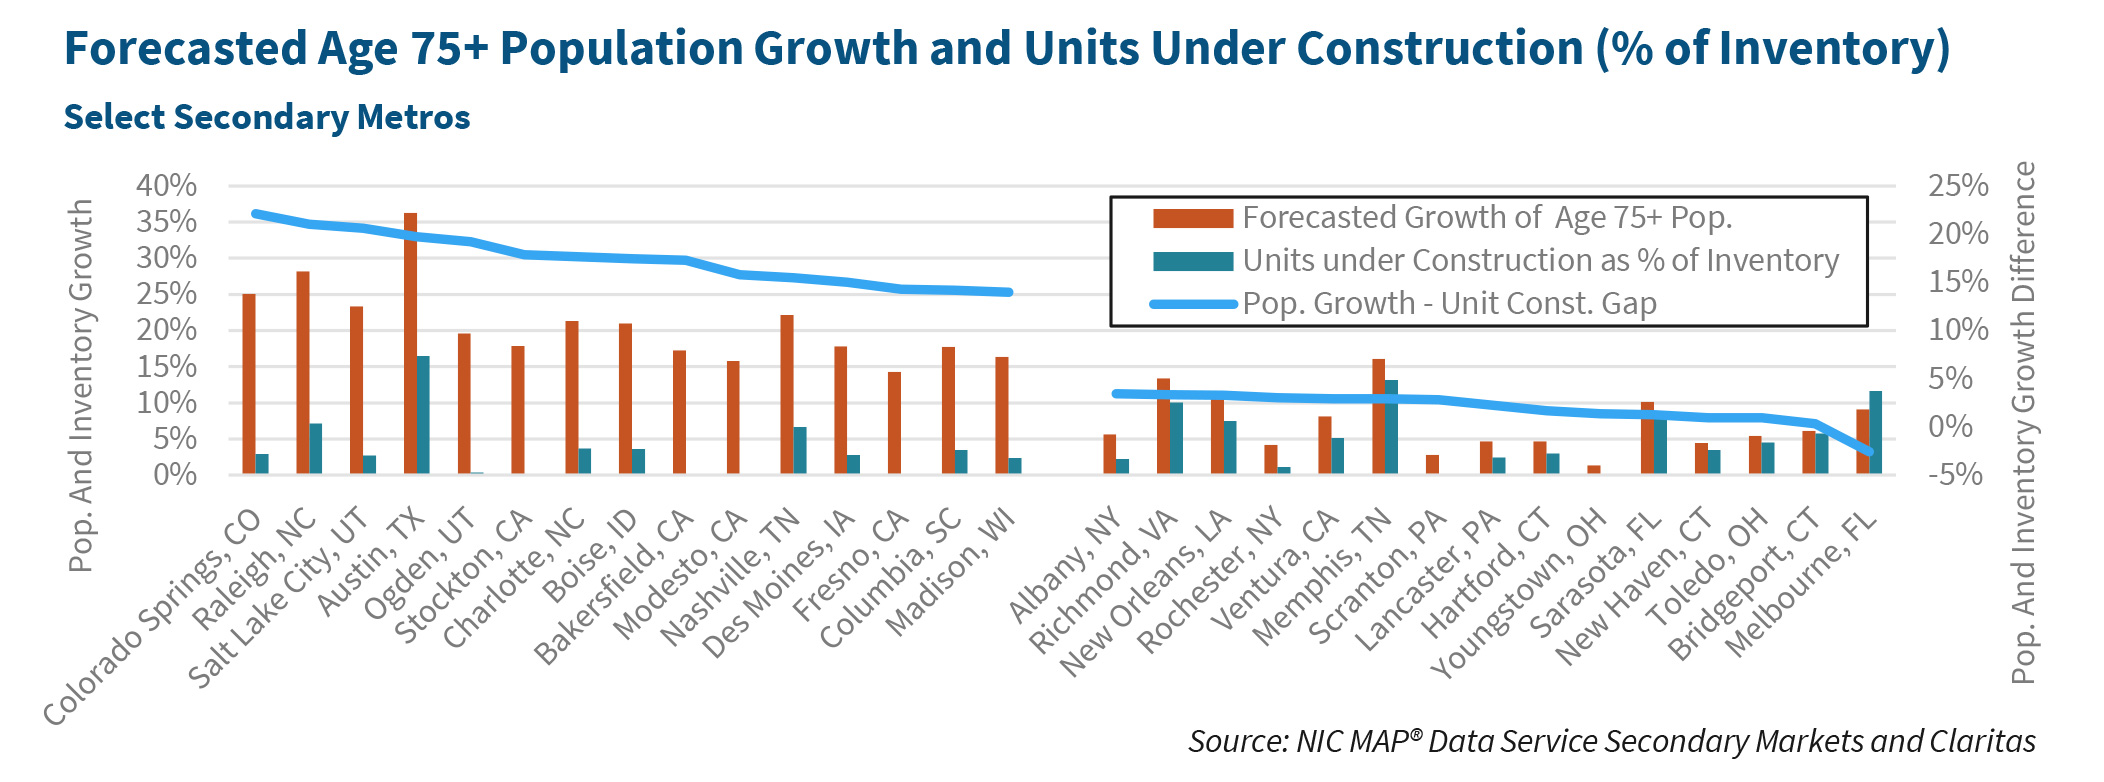 Forecasted Age 75+ Population Growth and Units Under Construction (% of Inventory): Select Secondary Metros